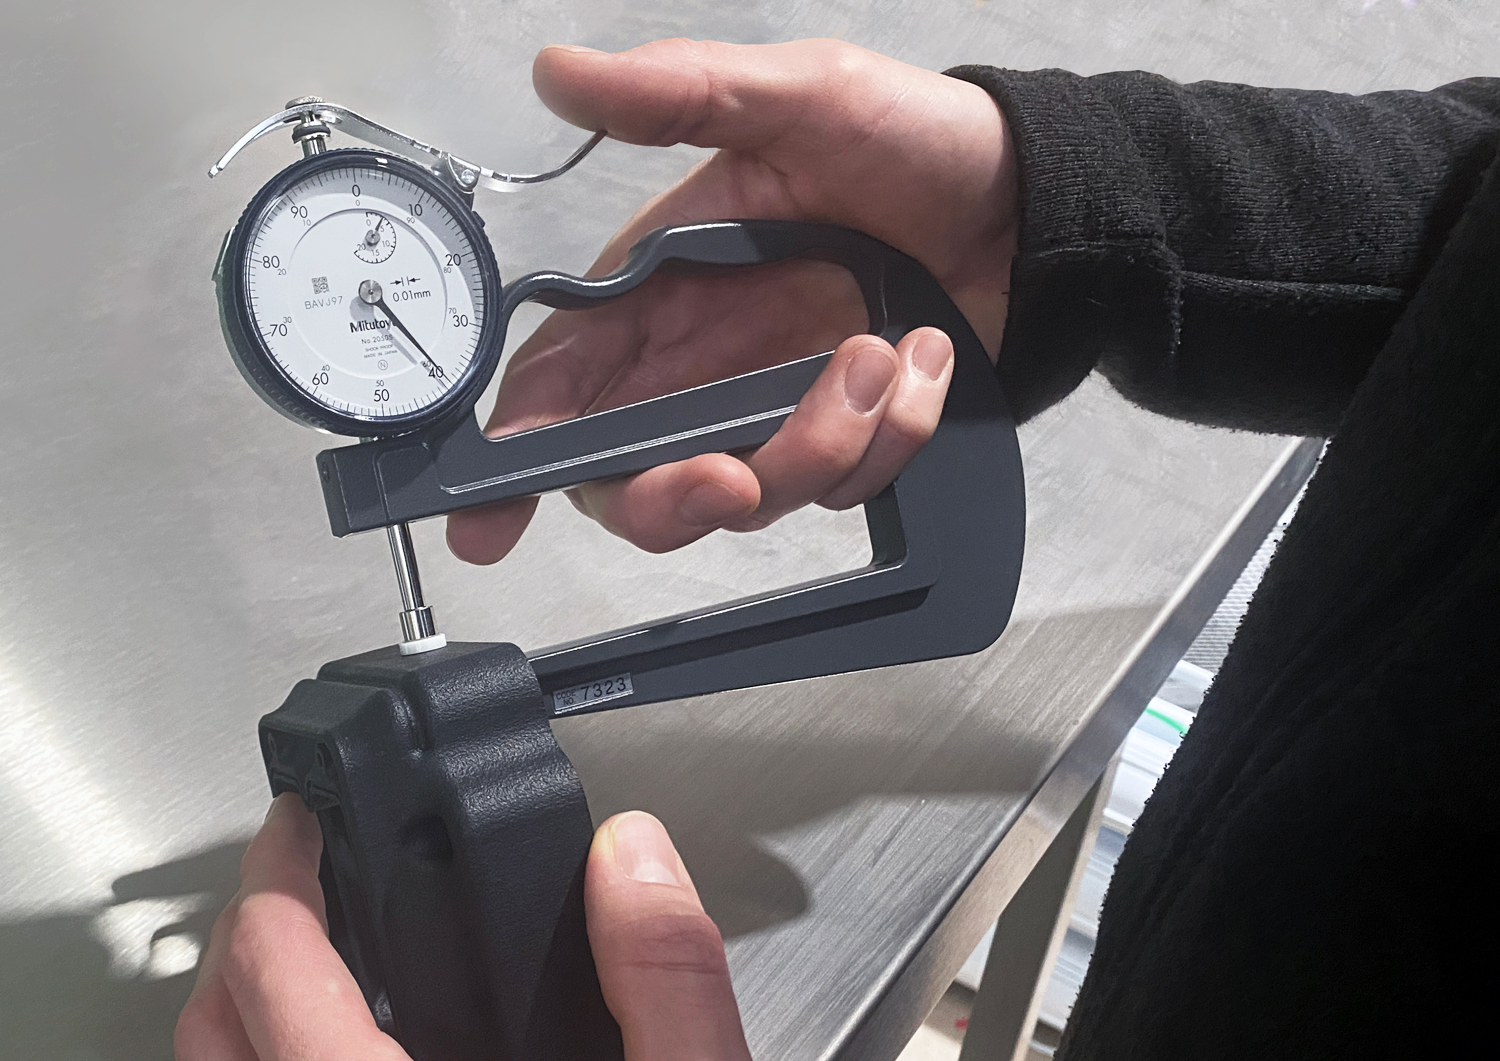 Wall thickness gauge, checking the consistency of the wall thickness.